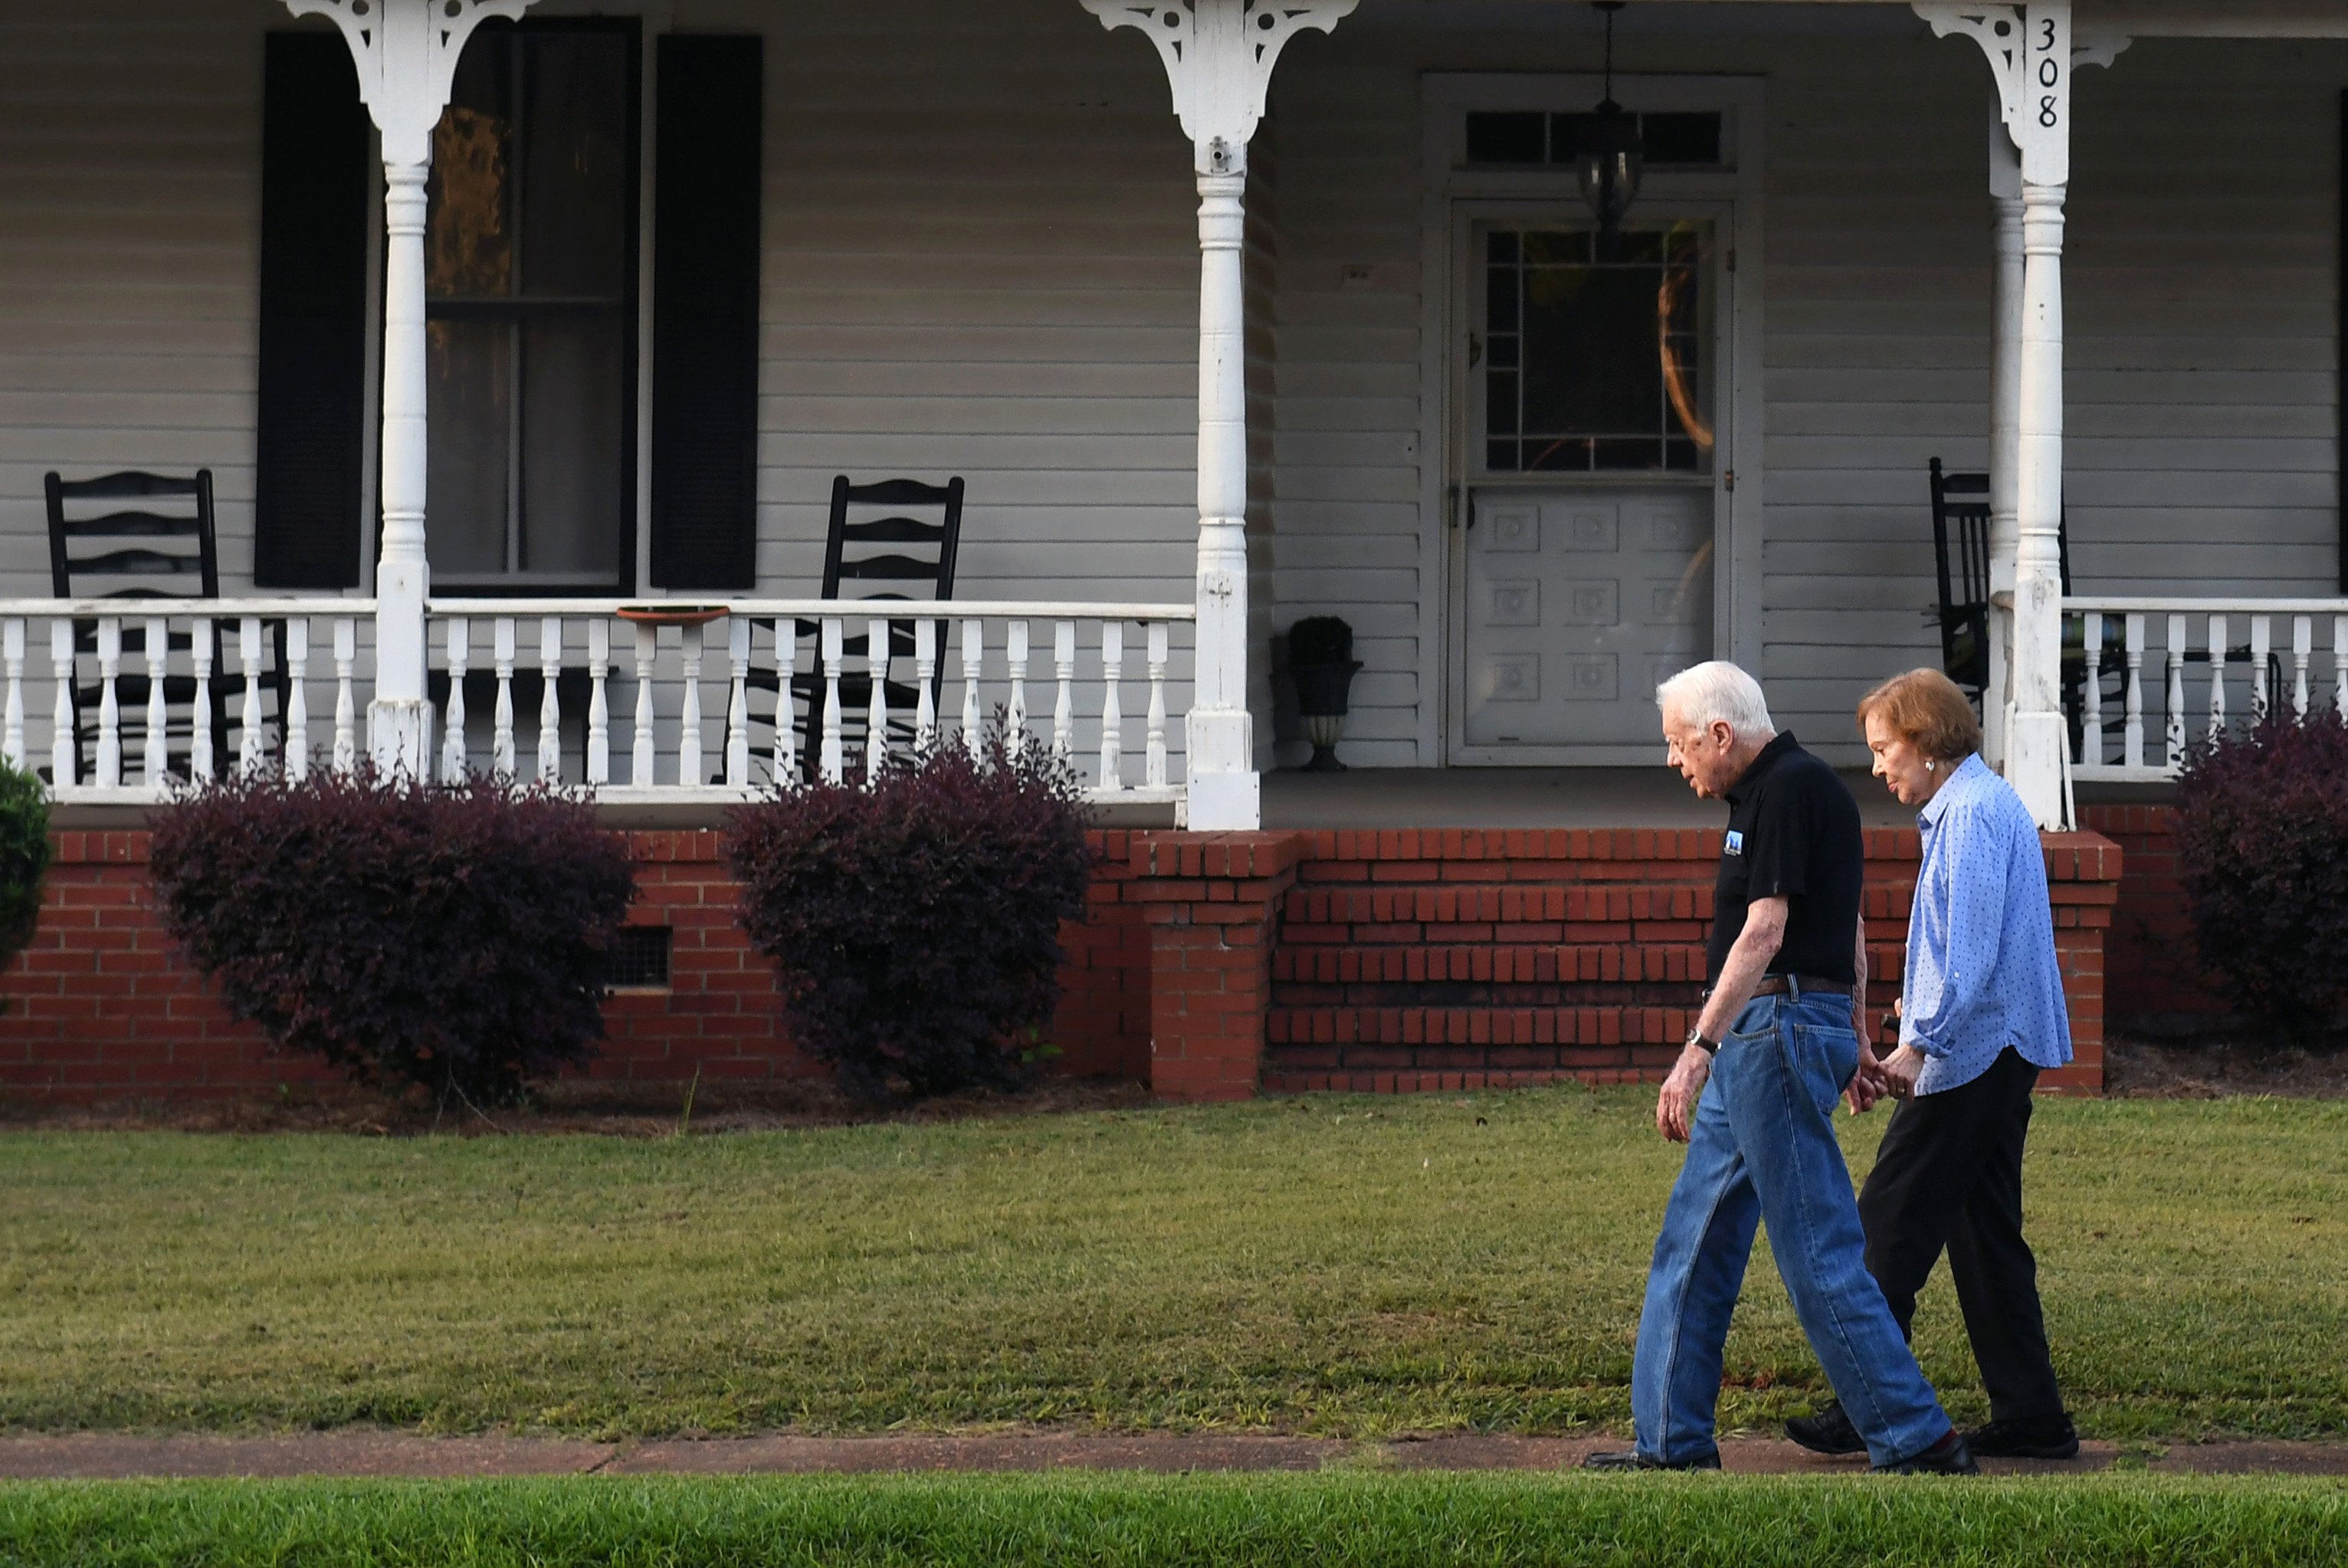 Former President of the United States, Jimmy Carter walks with his wife, former First Lady Rosalynn Carter, along with Secret Service on West Church Street after dinner at a friend's home on August 4, 2018, in Plains, Georgia | Source: Getty Images